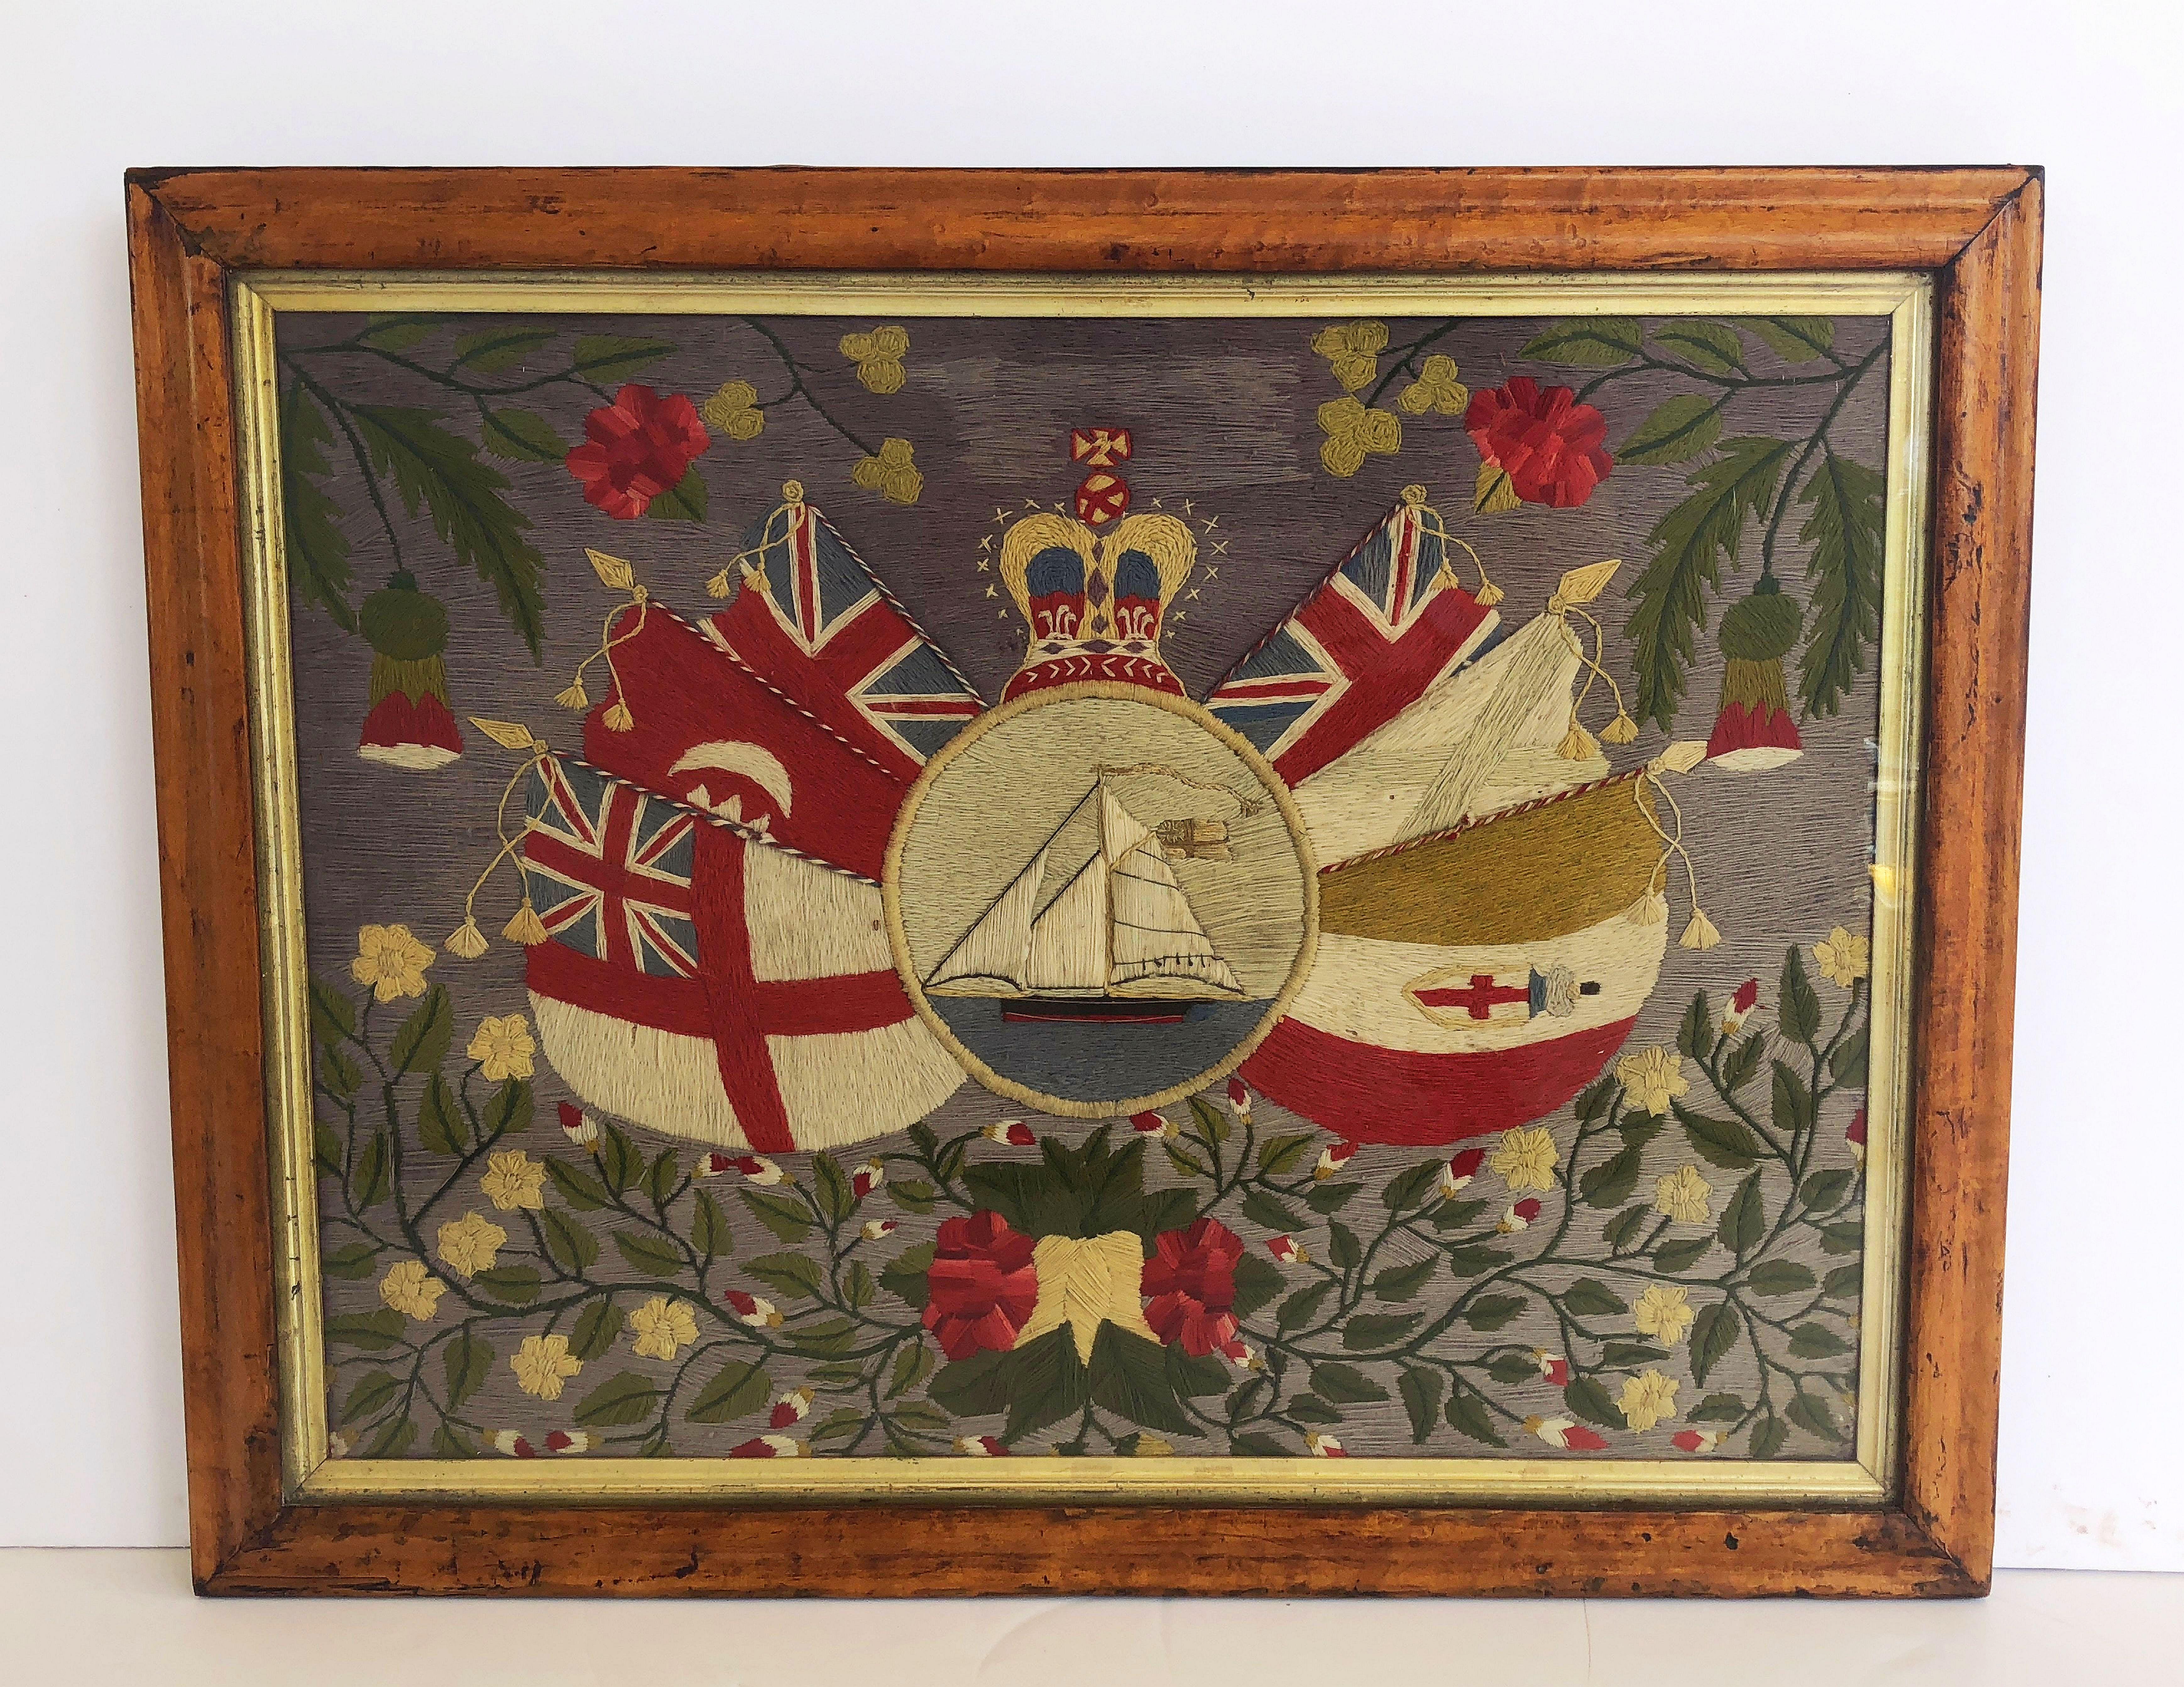 A 19th century English naval sailor's woolwork (or woolie) depicting a sailing ship or wooden frigate and the flags of the participants during the Crimean War (1853-1856), framed in bird's-eye maple and under glass.

Includes the Union Jack flag of